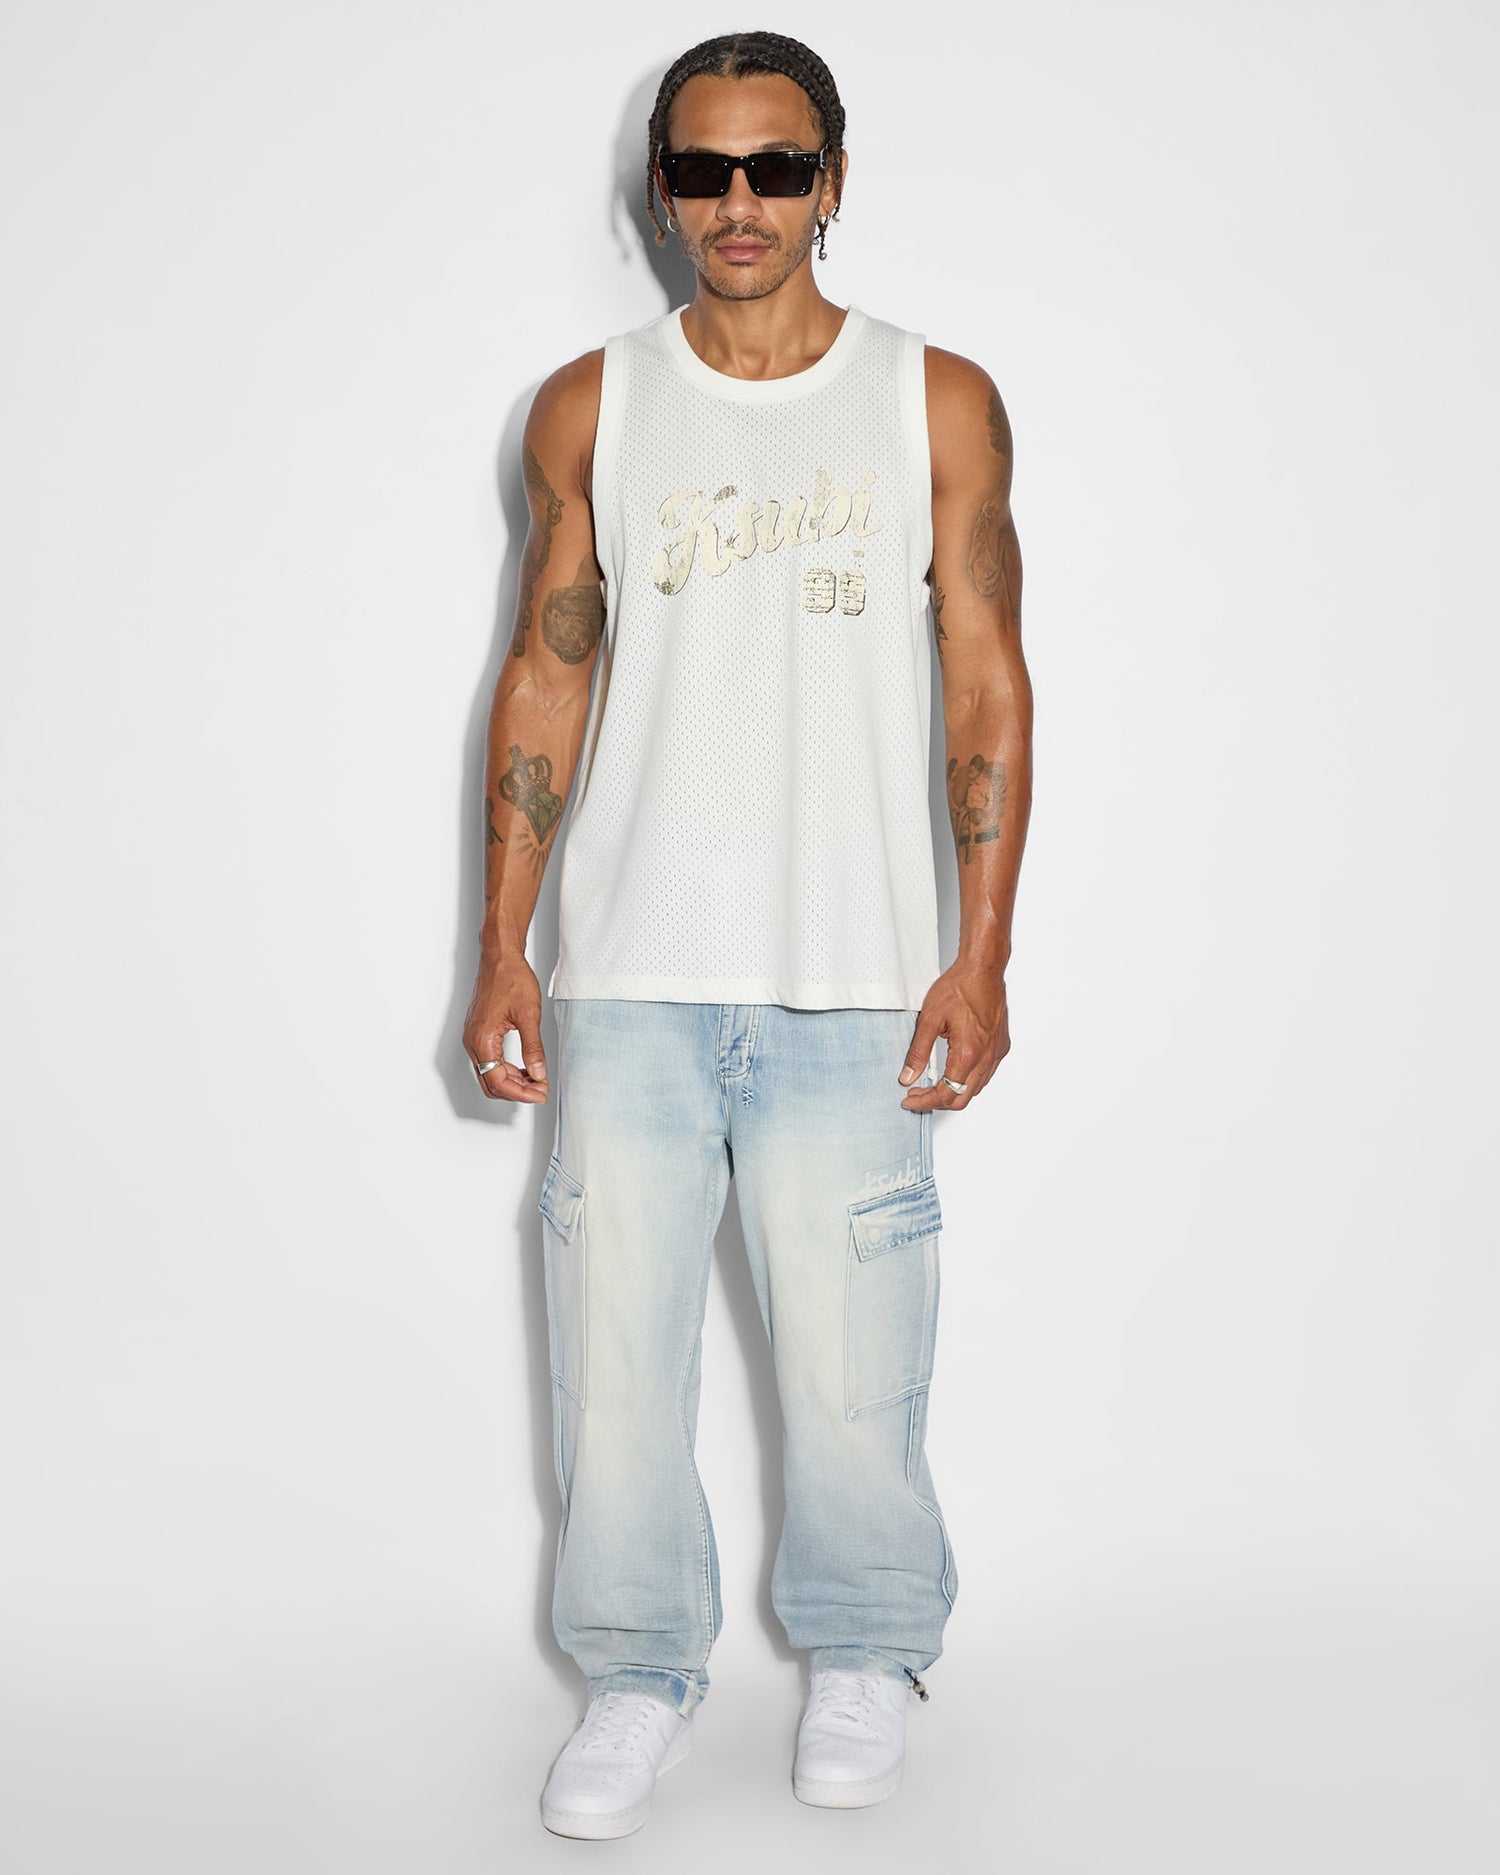 RIOT CARGO PANT BLUE ICE